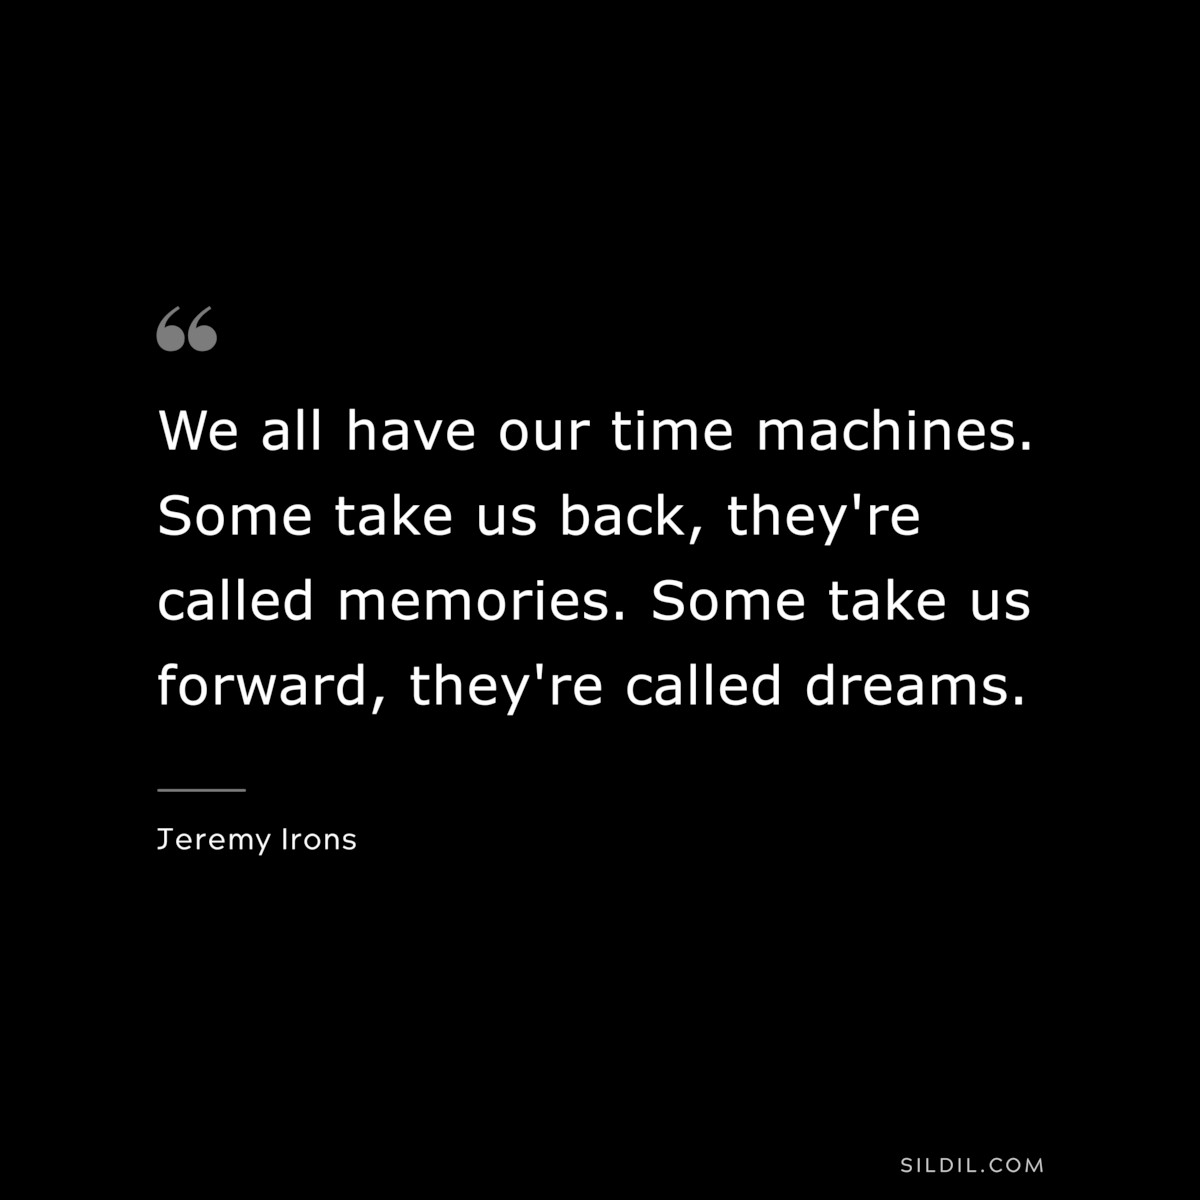 We all have our time machines. Some take us back, they're called memories. Some take us forward, they're called dreams. ― Jeremy Irons